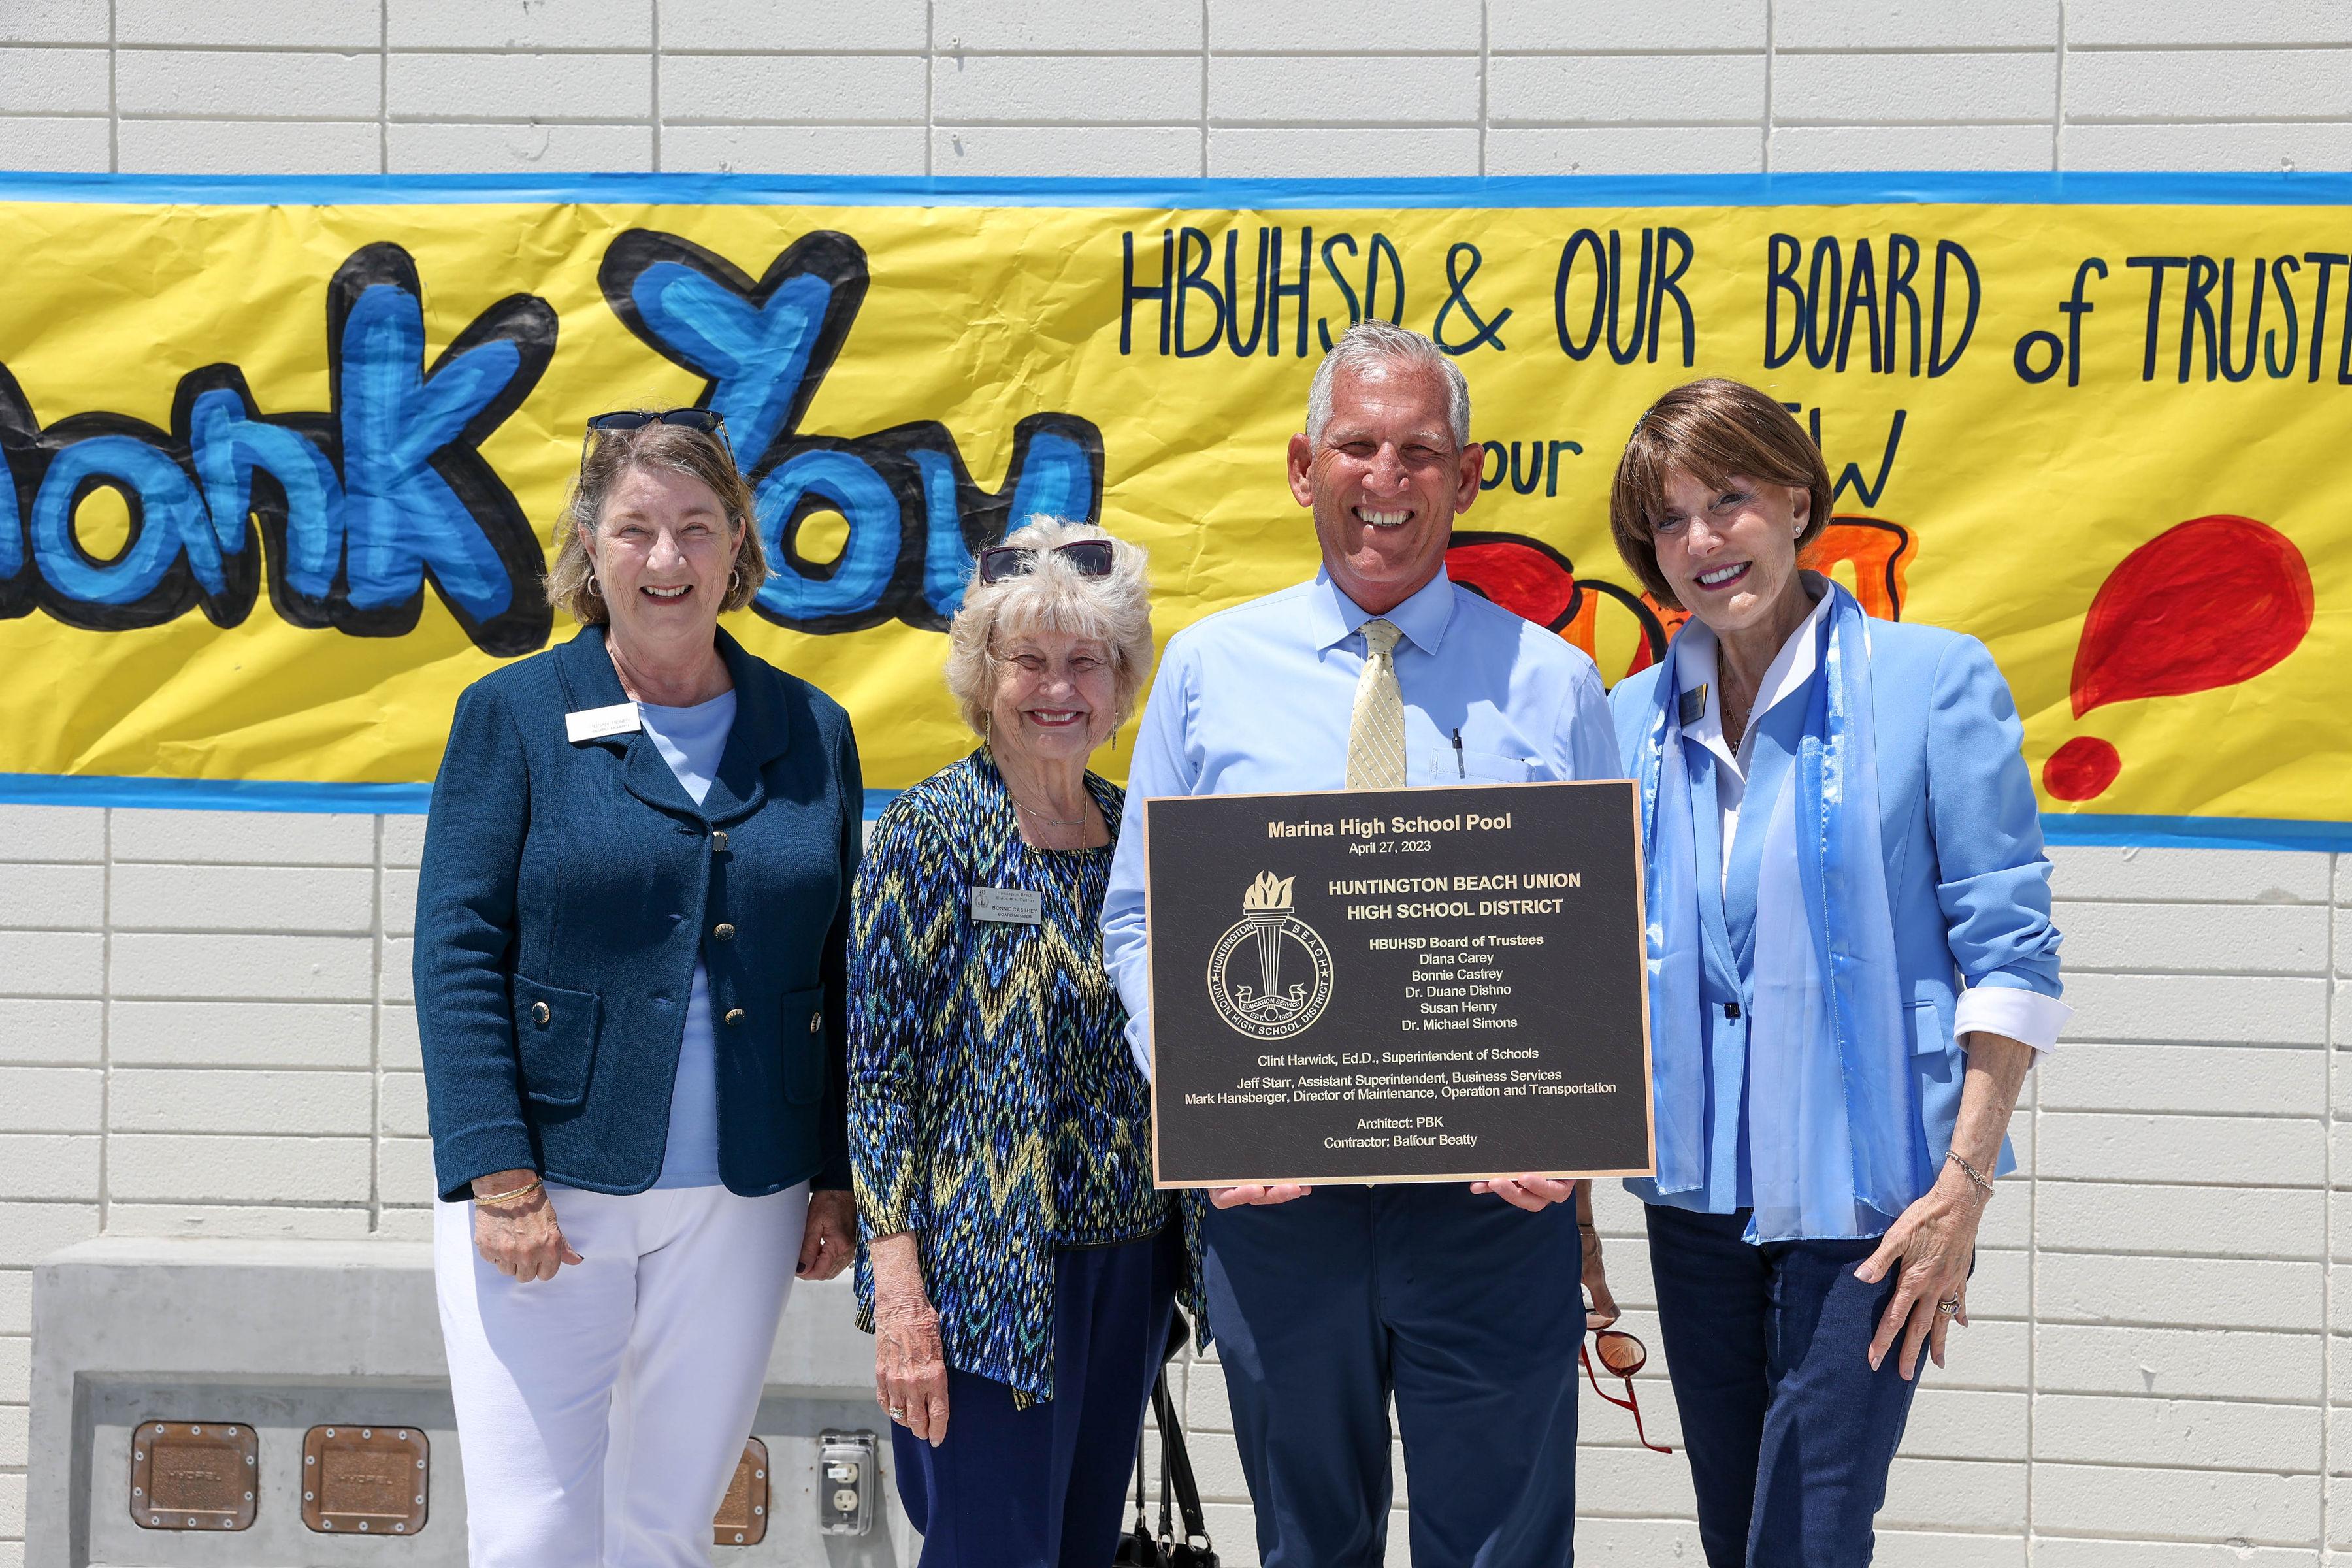 Dr. Harwick and board members presenting MHS pool plaque